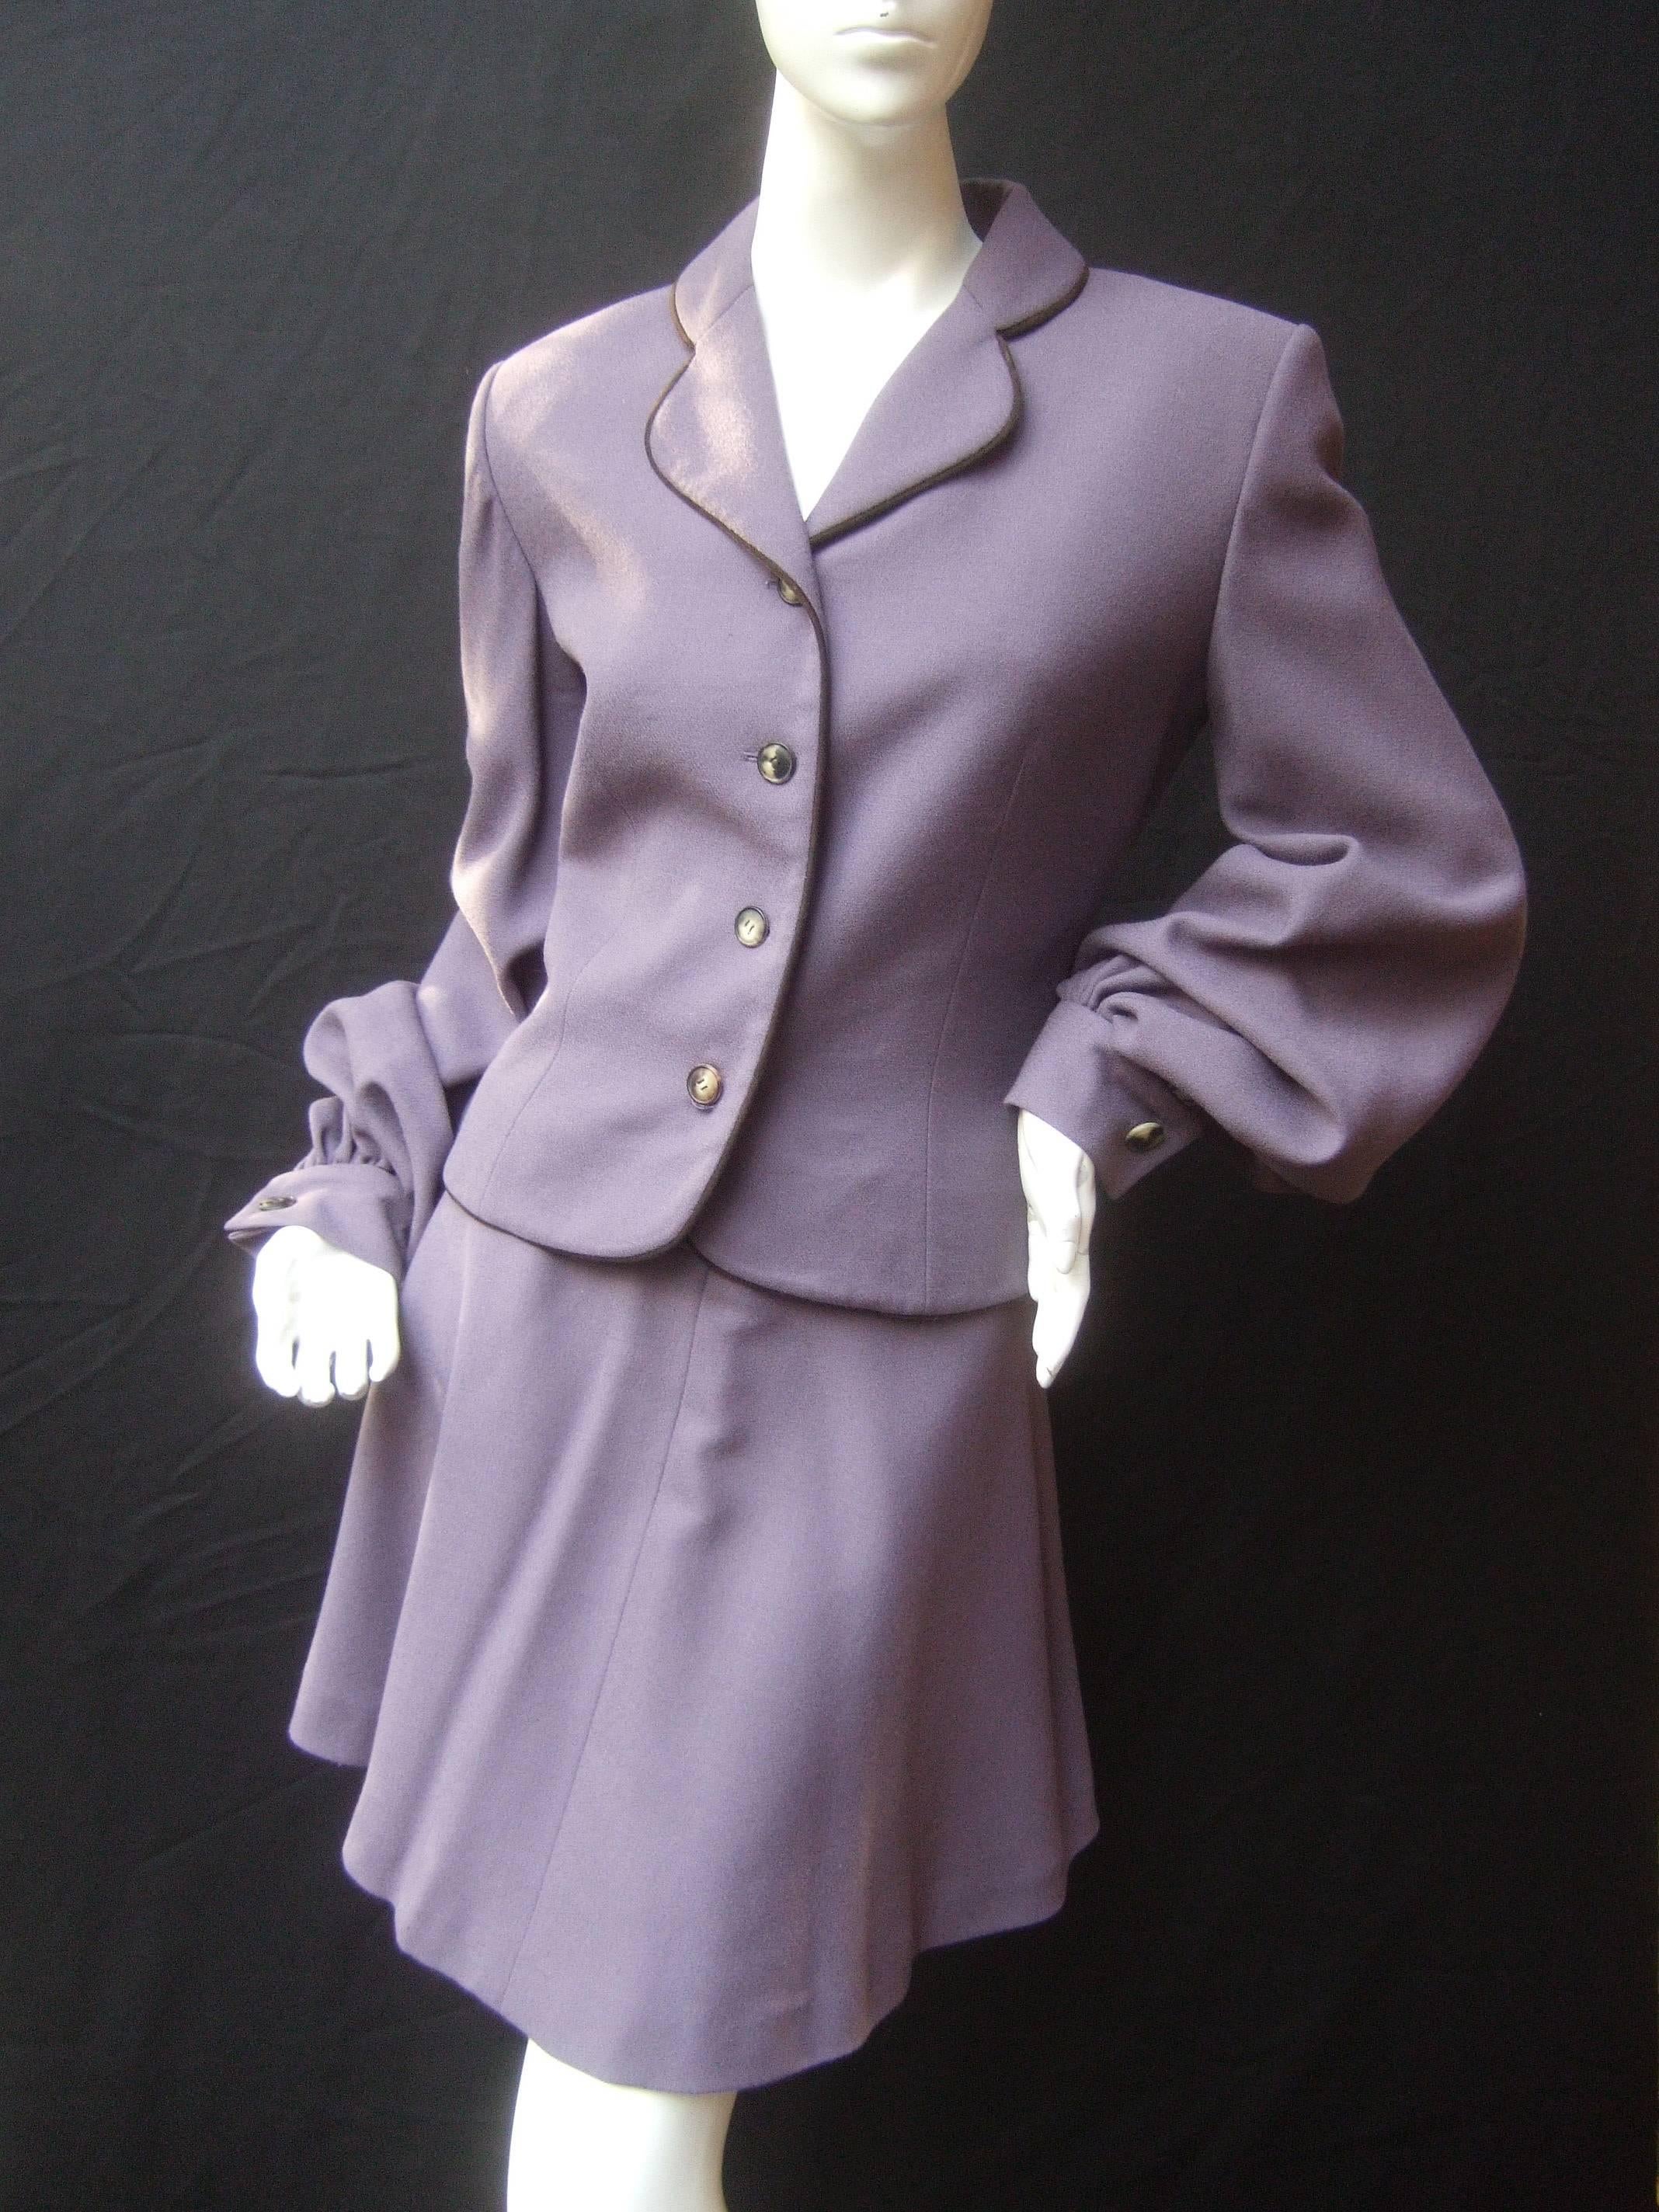 Givenchy Couture Lavender wool skirt suit Size 38
The chic pastel laine wool skirt suit is designed 
with a lavender jacket with four resin horn
buttons that run down the front

The jacket sleeves are voluminous with
subtle pleats that circle